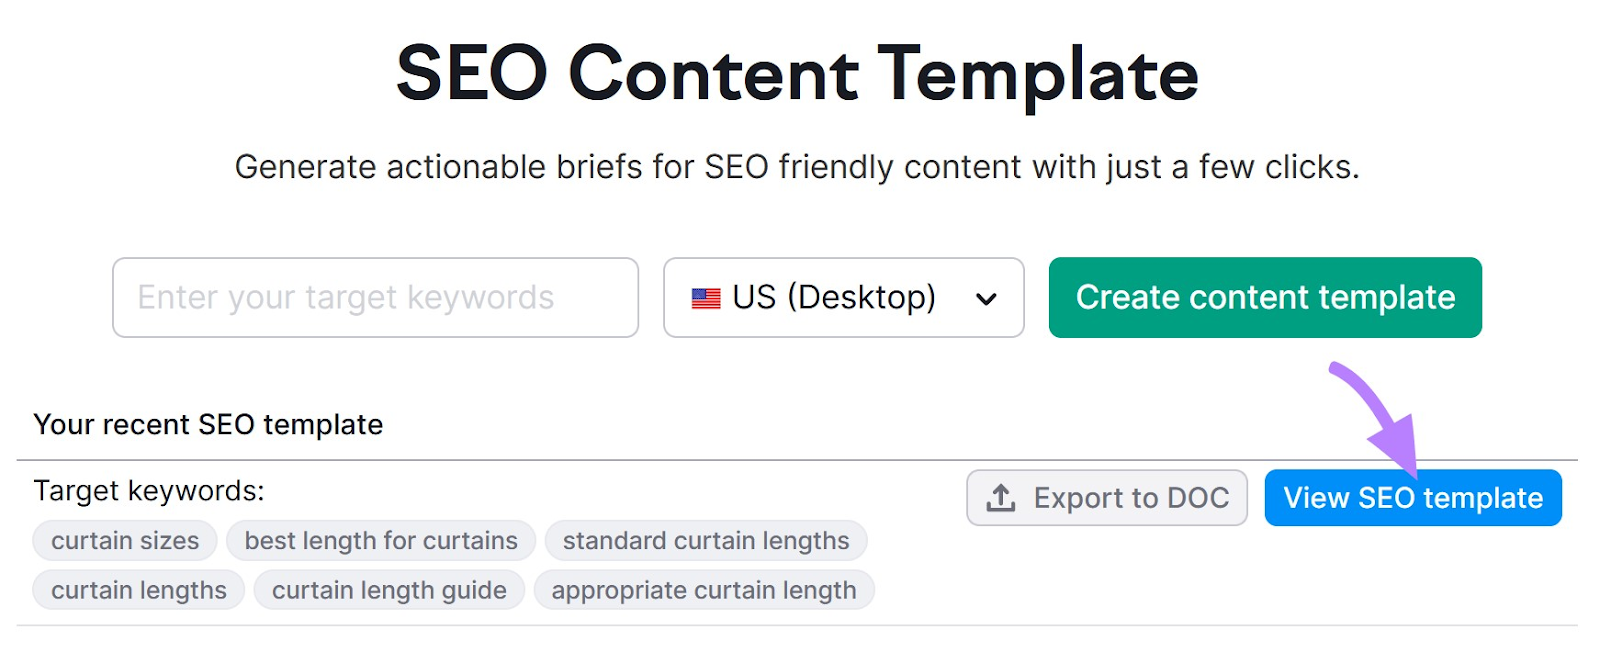 View SEO template button highlighted